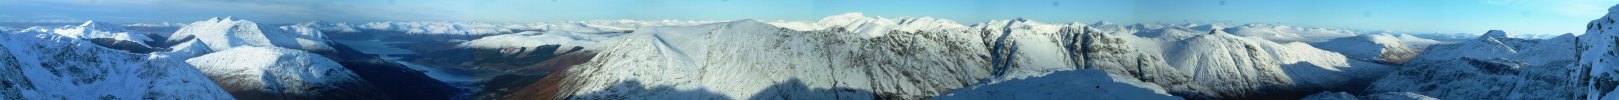 20031230-114000.jpg - 180° semi-panorama including Loch Leven and Ben Nevis from Stob Coire nan Lochan